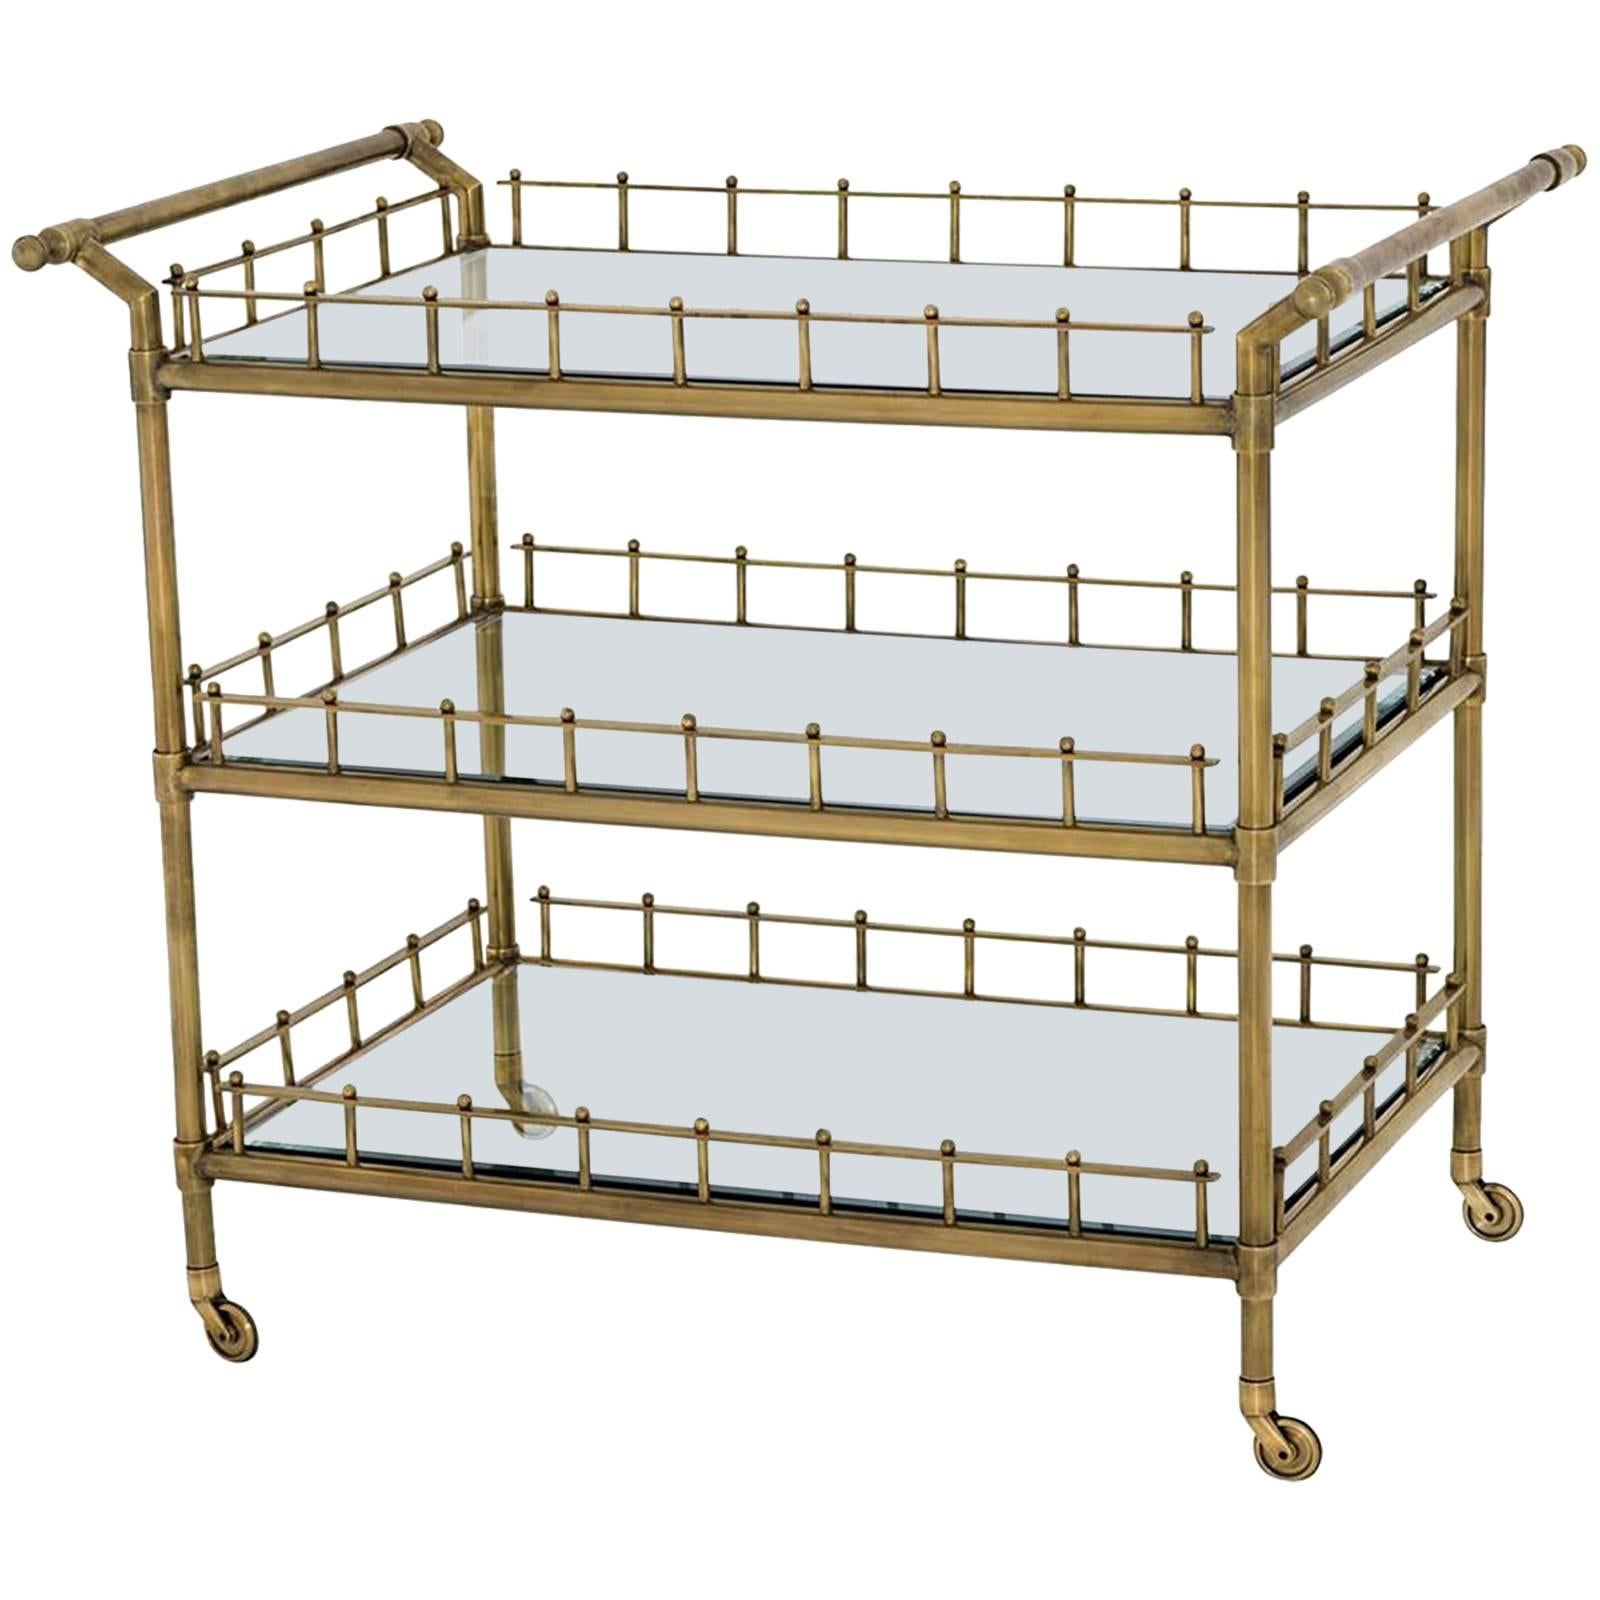 Queen Trolley in Vintage Brass or Polished Stainless Steel